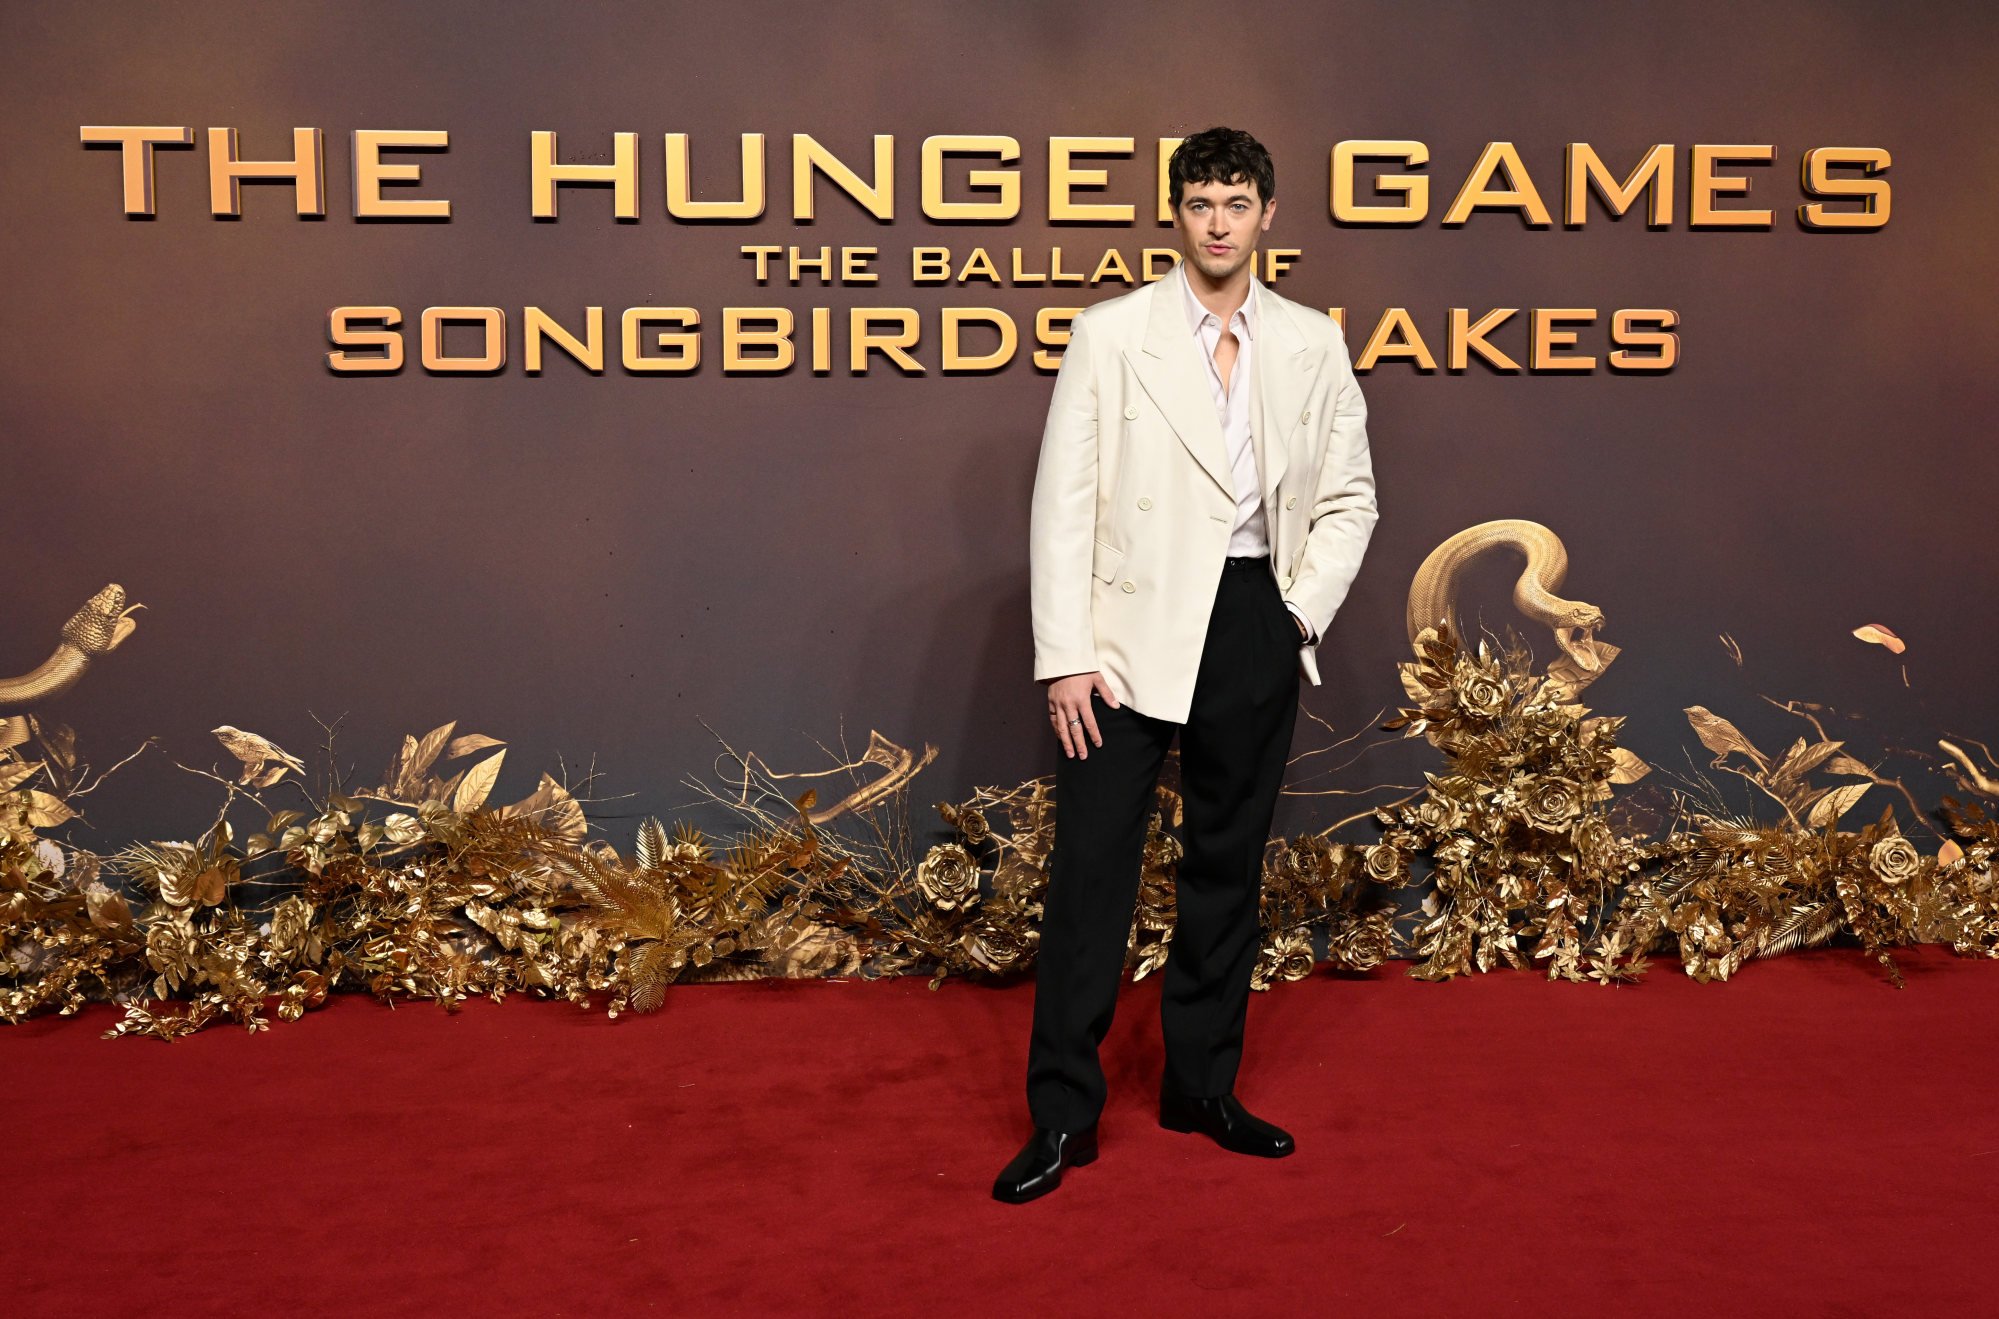 The Ballad of Songbirds and Snakes: Meet the Hunger Games Prequel